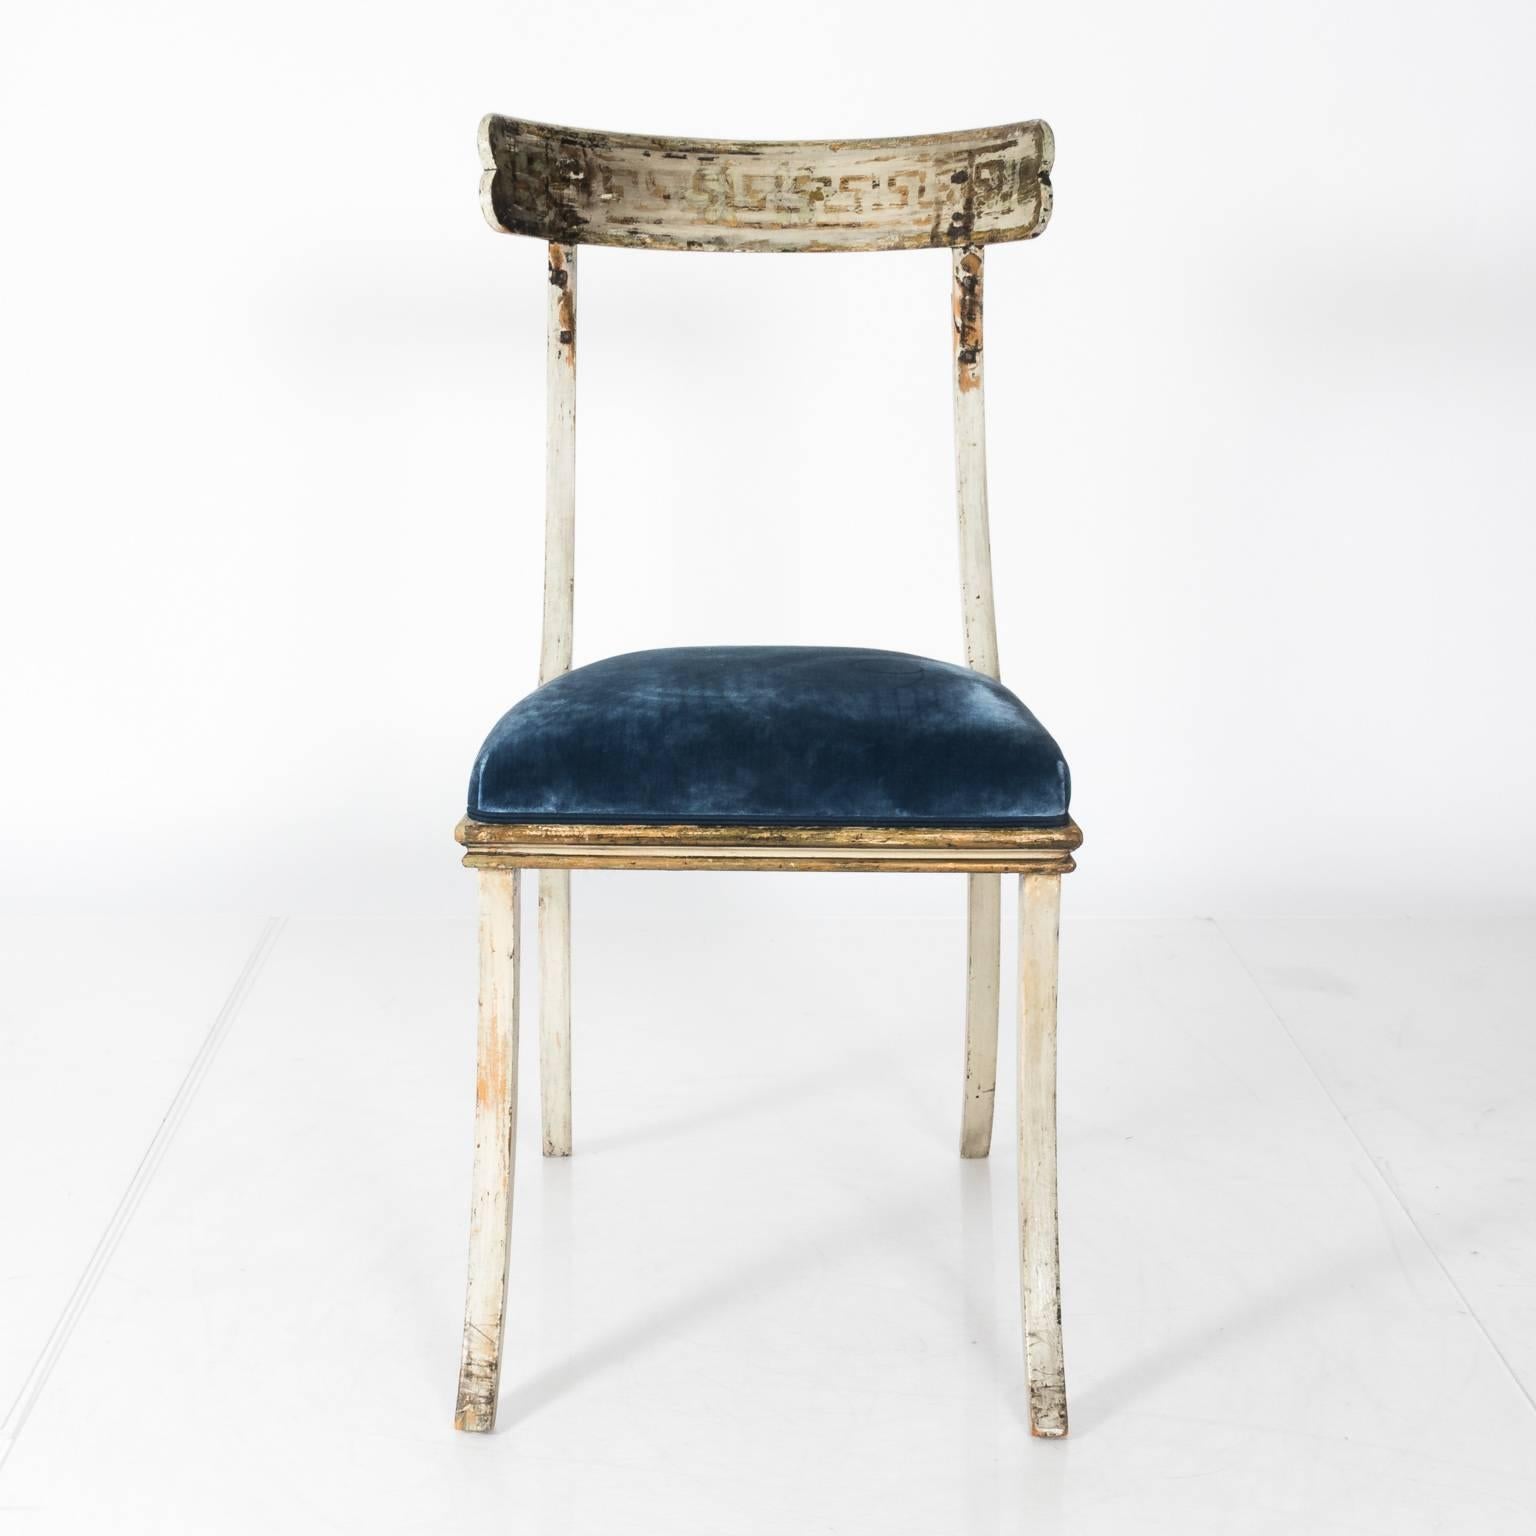 Swedish klismos chairs, circa late 19th century.
Circa late 19th century Swedish klismos chairs  with blue velvet seats and features traces of original gilt paint with Greek key detailing on the back”  Condition:  Stains to velvet.  Paint is worn in